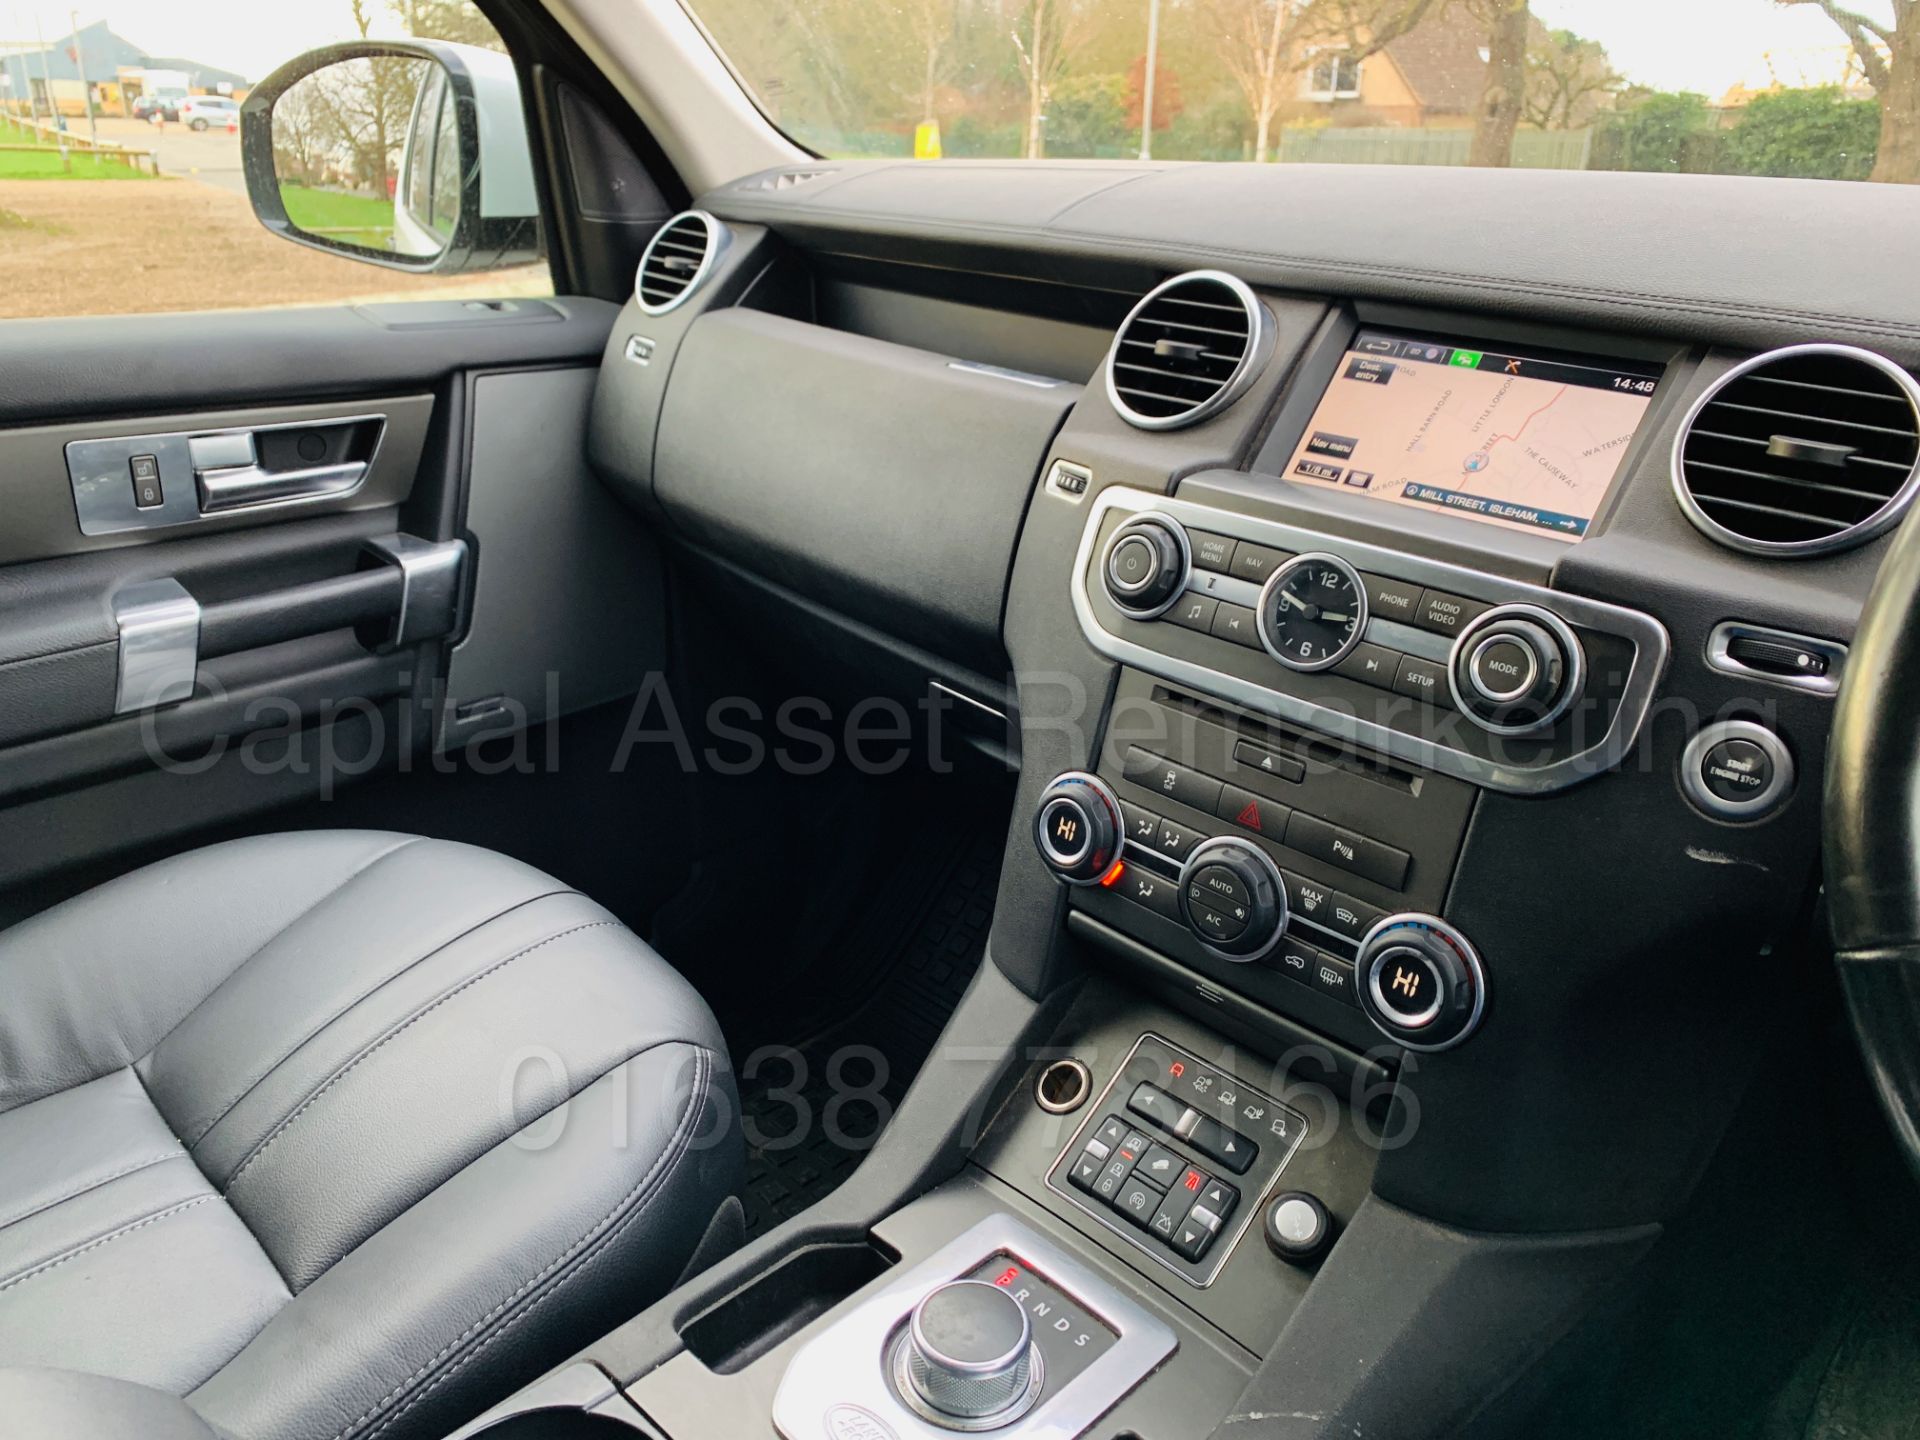 (ON SALE) LAND ROVER DISCOVERY 4 *XS EDITION* (2015) '3.0 SDV6 - 8 SPEED AUTO' *LEATHER & SAT NAV* - Image 41 of 52